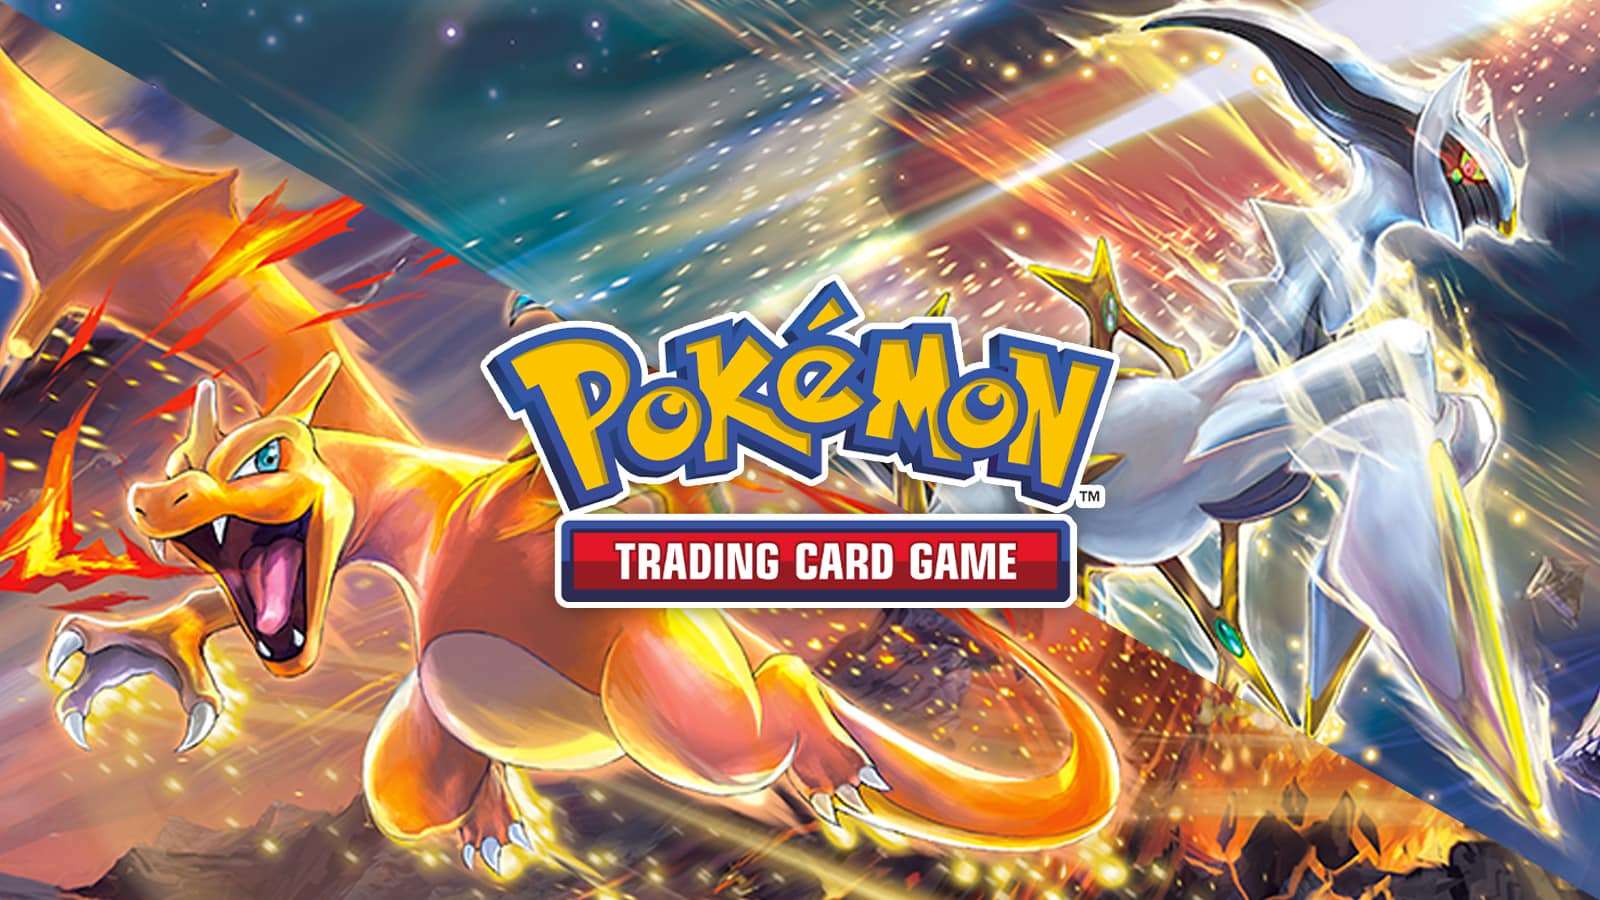 All Japanese Pokémon cards – Trading Card Games